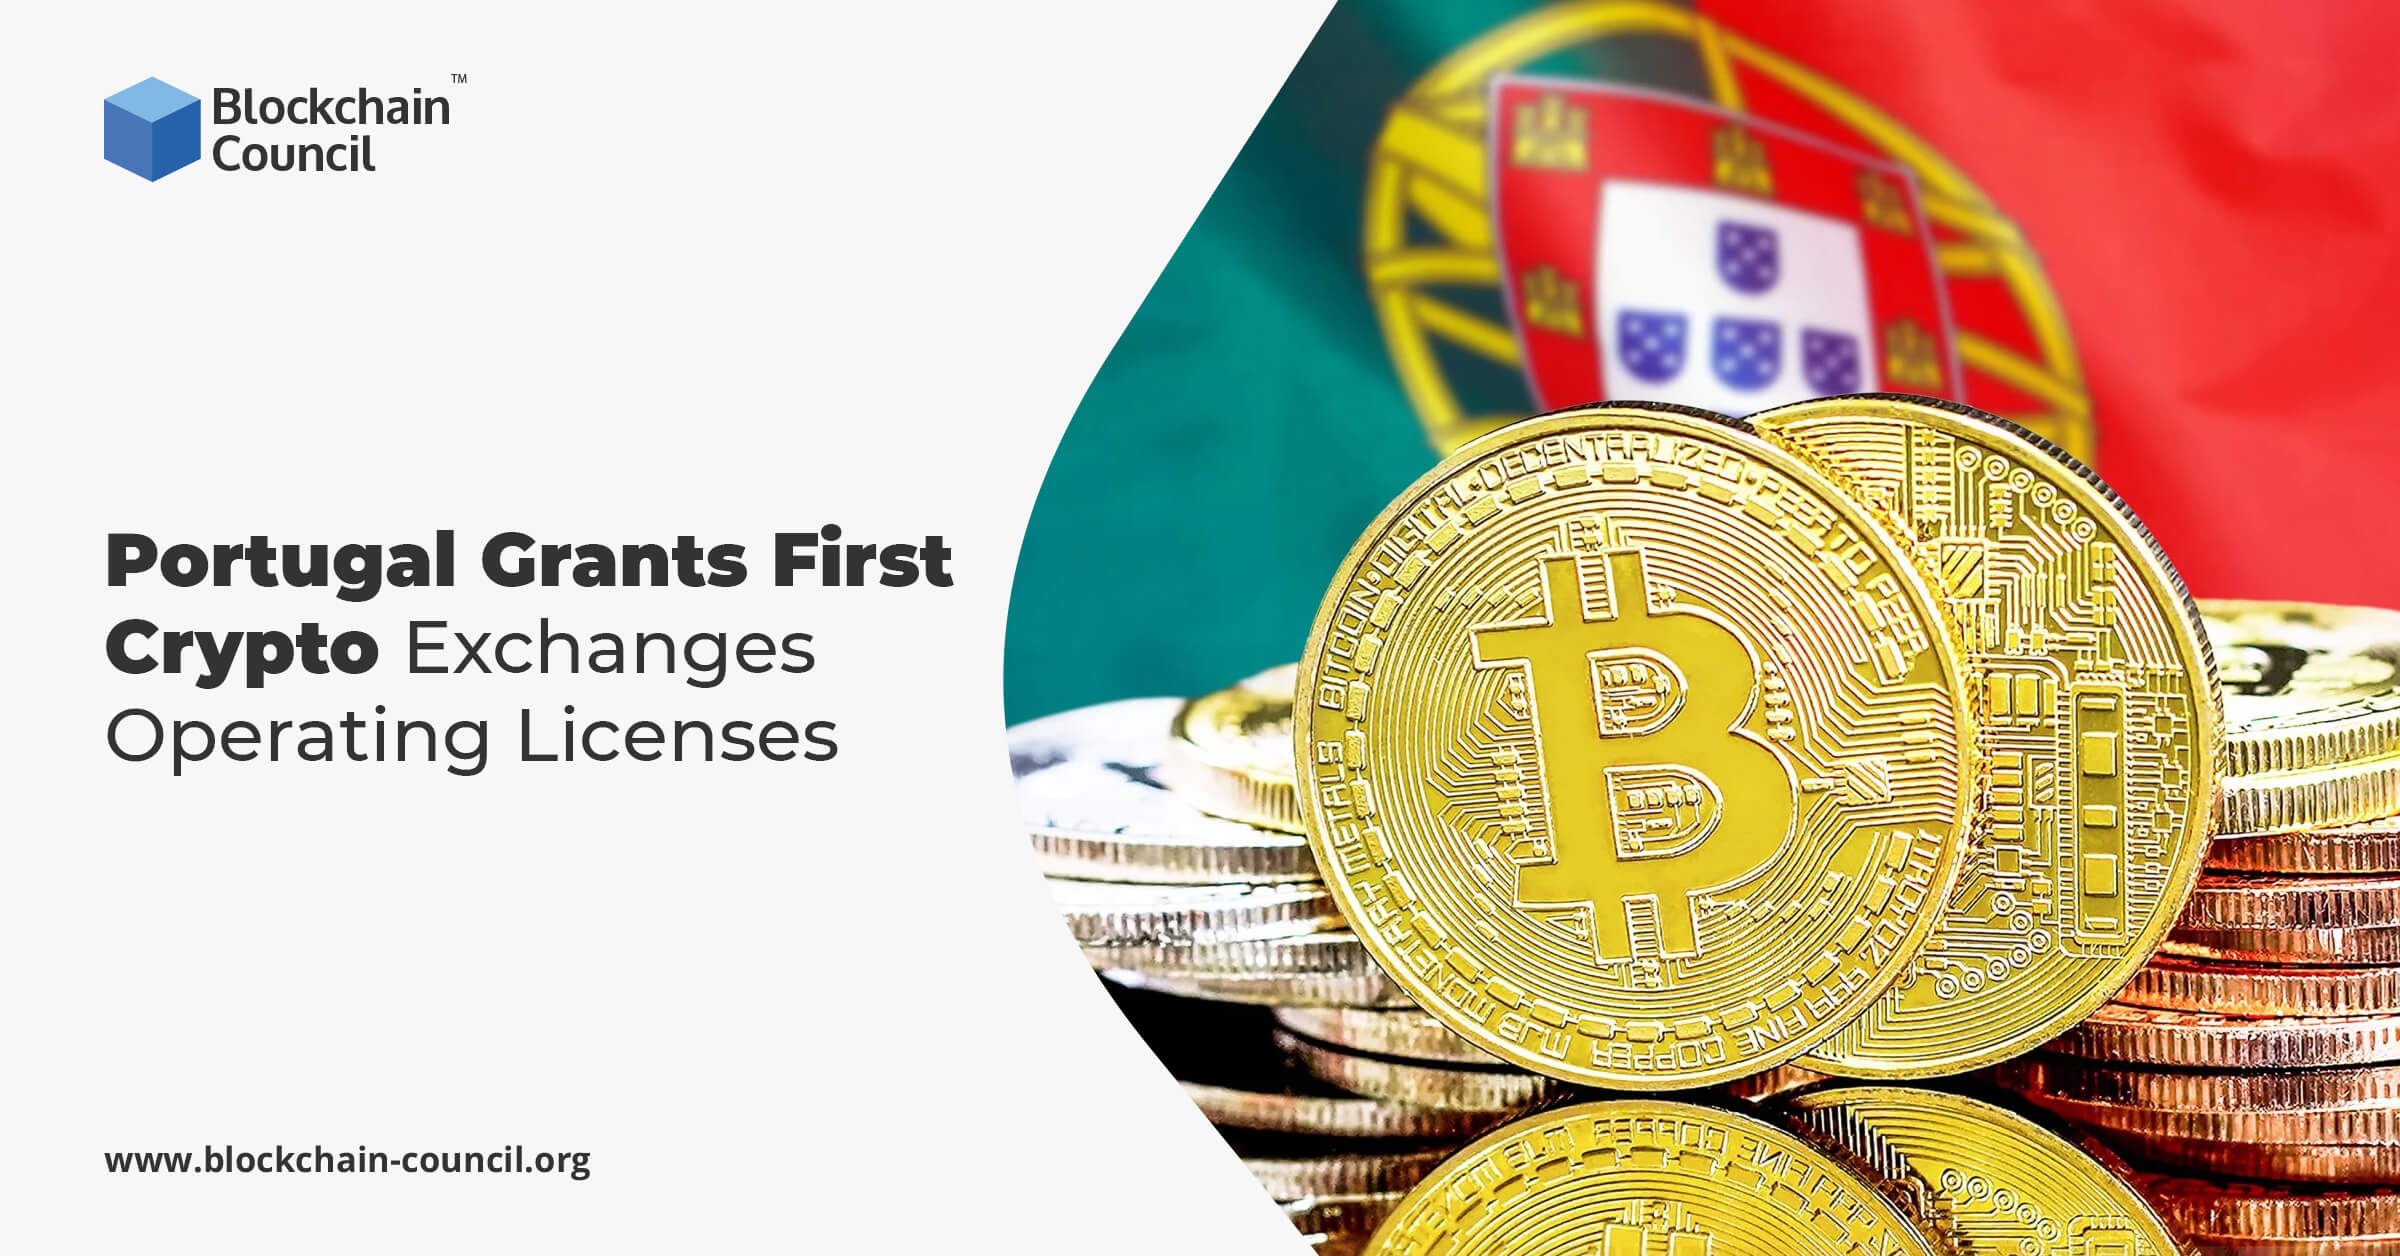 Portugal Grants First Crypto Exchanges Operating Licenses